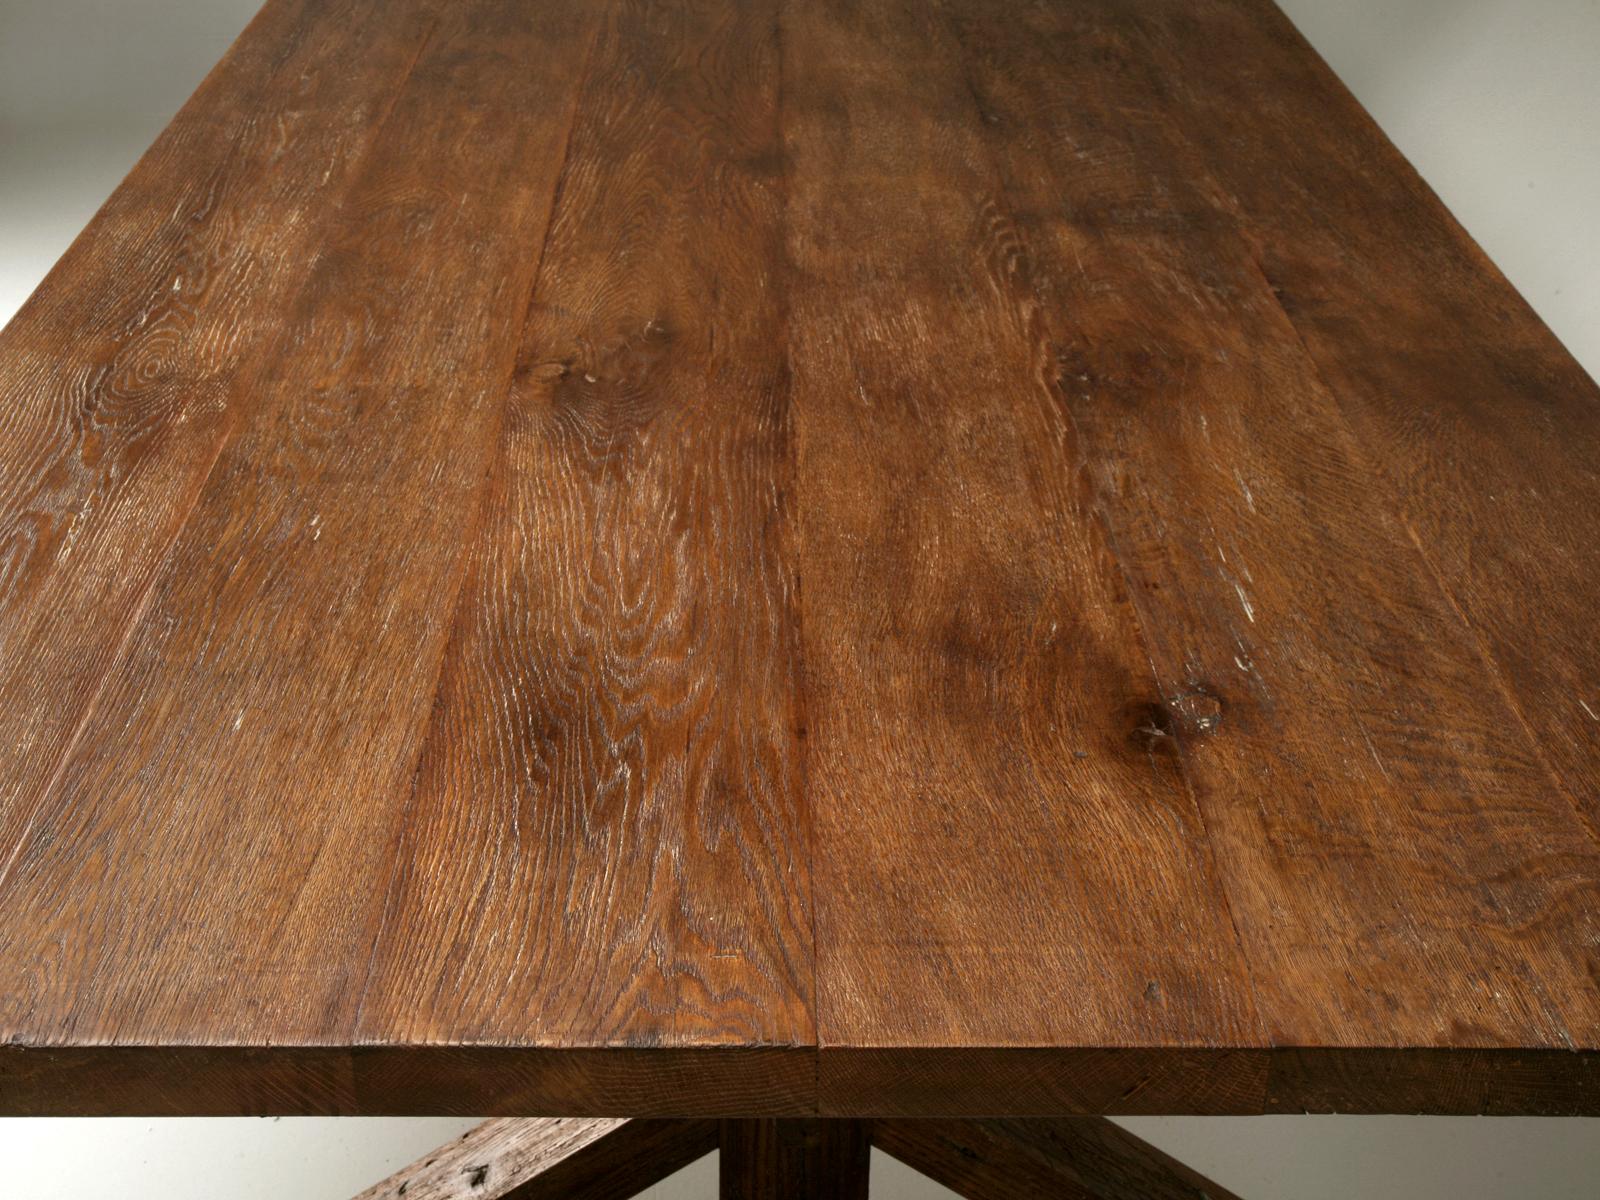 Country French Farm Style Dining Room Table, or would make for a Great Kitchen Table. Hand fabricated in our Chicago workshop from old wide planks of white oak lumber. Generally, our French inspired Dining Table or Kitchen Table would be made from